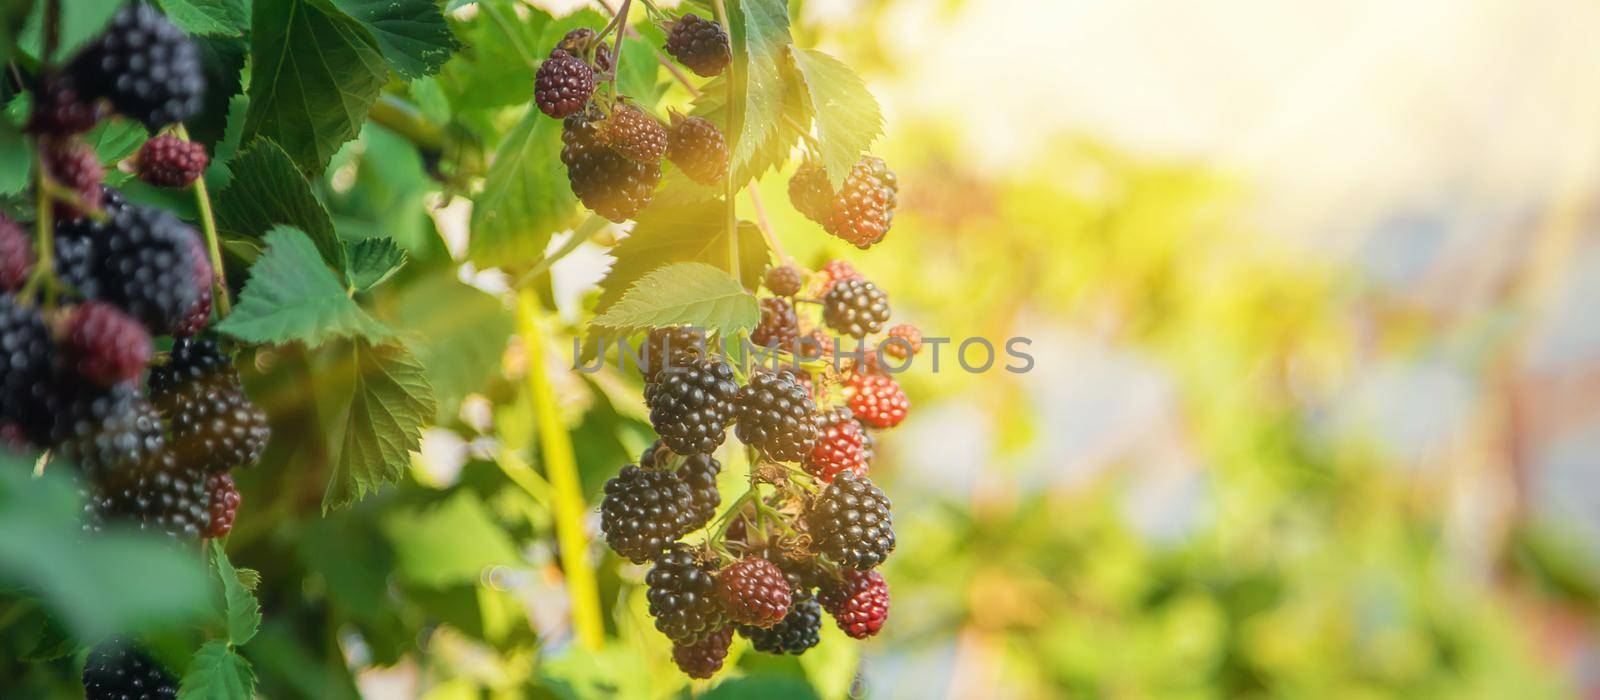 Blackberry berries on the bushes in the garden. Selective focus. nature.